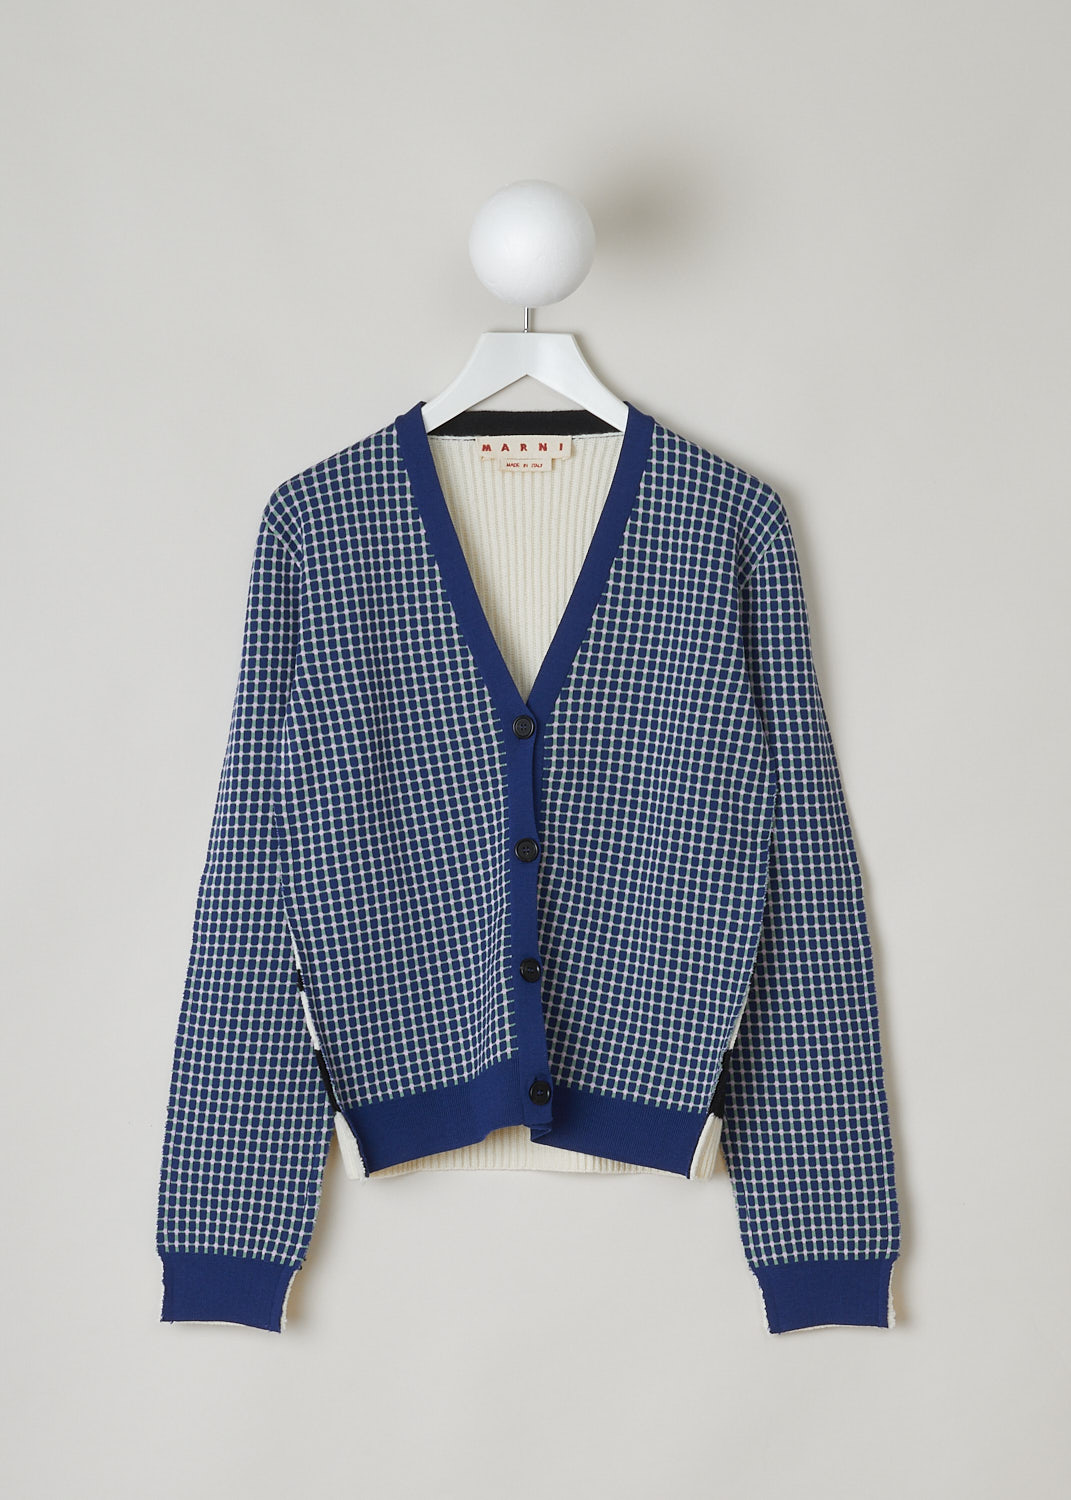 MARNI, ICONIC HALF & HALF MULTICOLOR CARDIGAN, CDMD0322Q0_UFW523_M2X99, Print, Blue, Pink, Front, This Iconic Half & Half cardigan has a smooth multicolor print front and a ribbed white back with black horizontal stripes. The cardigan has a V-neck with a blue button placket. The long sleeves have cuffs in that same blue fabric. The cardigan has raw edges throughout. 

